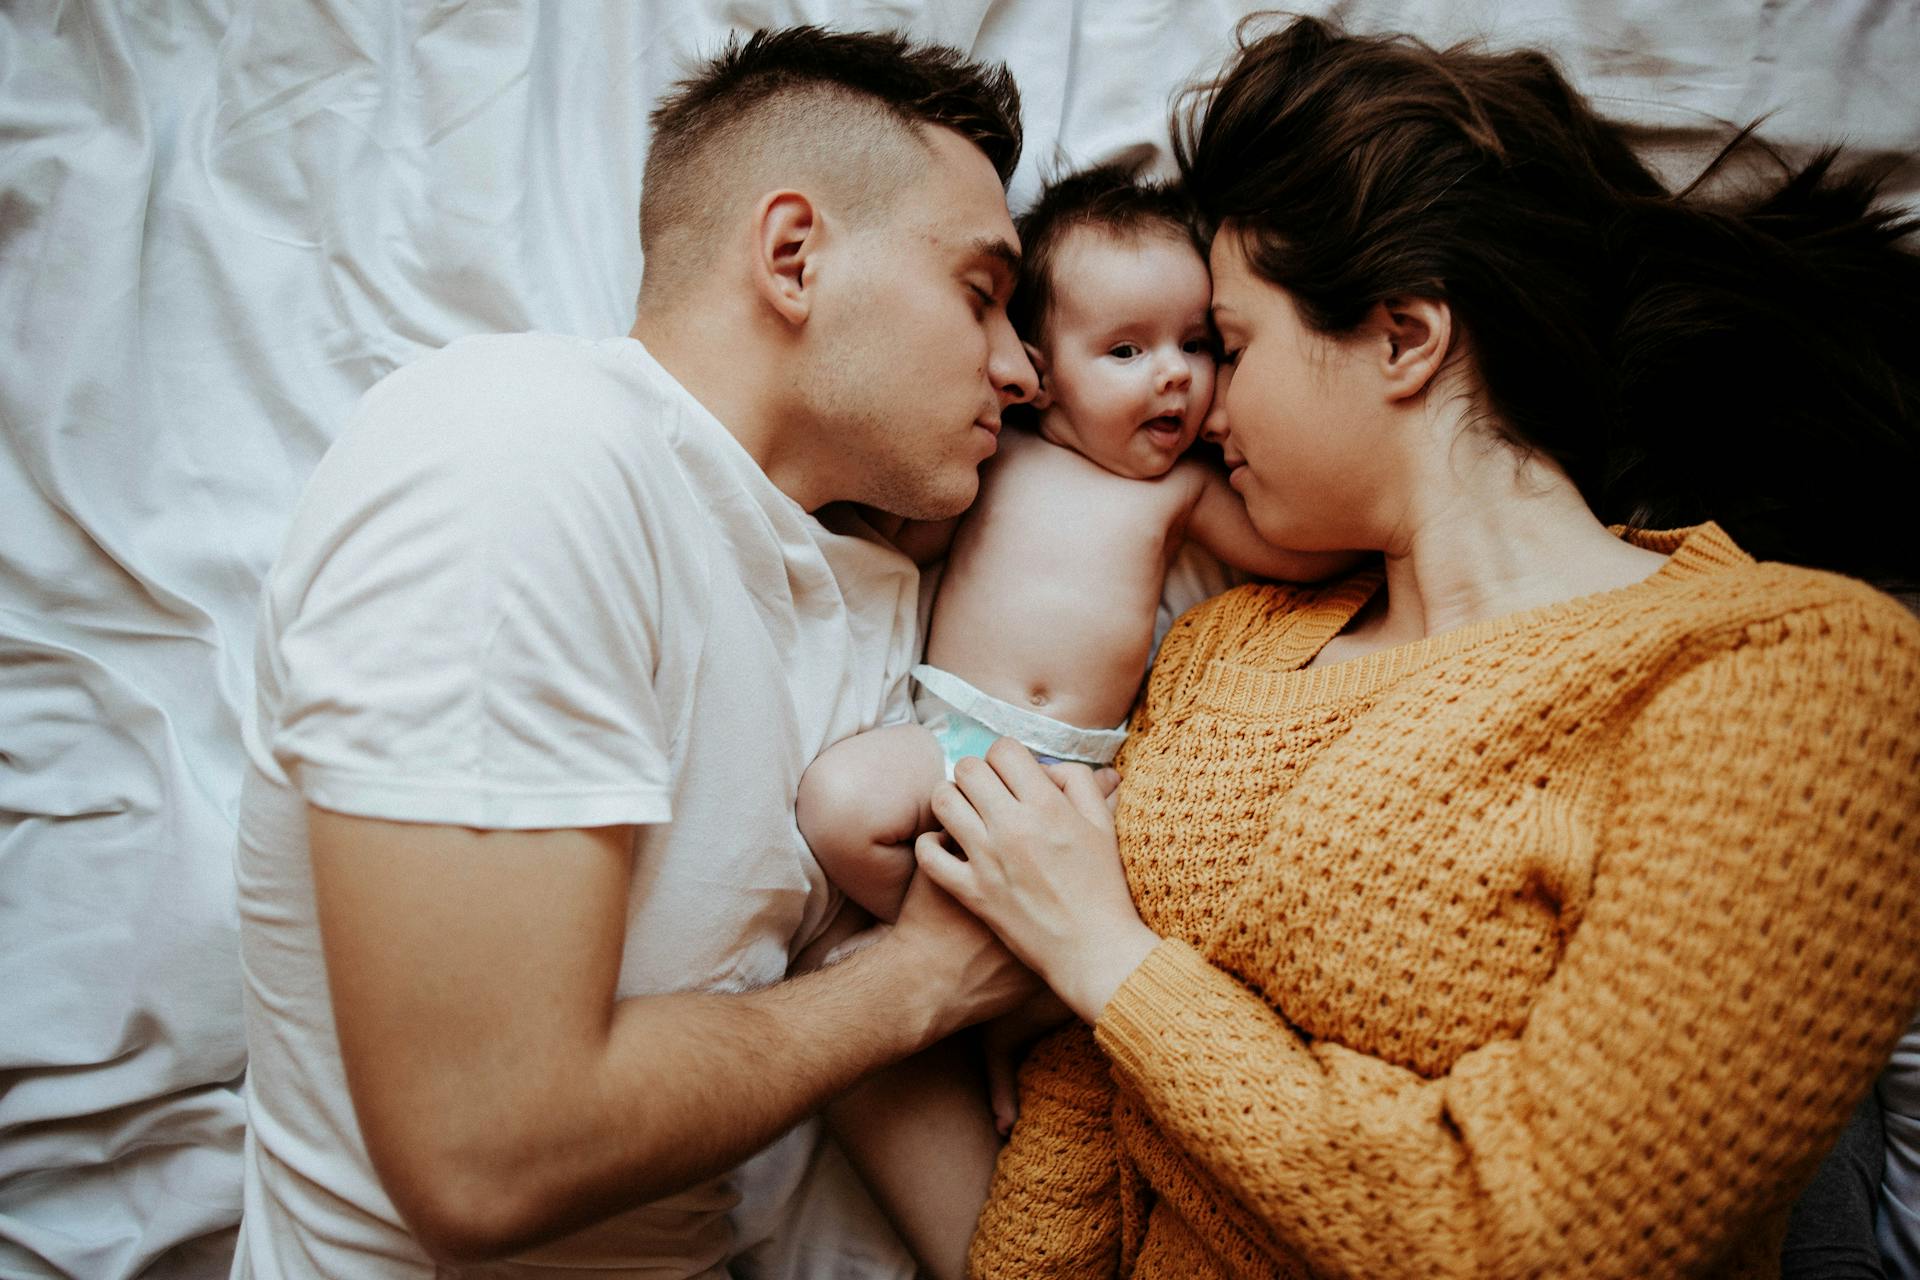 A couple in bed with a baby | Source: Pexels